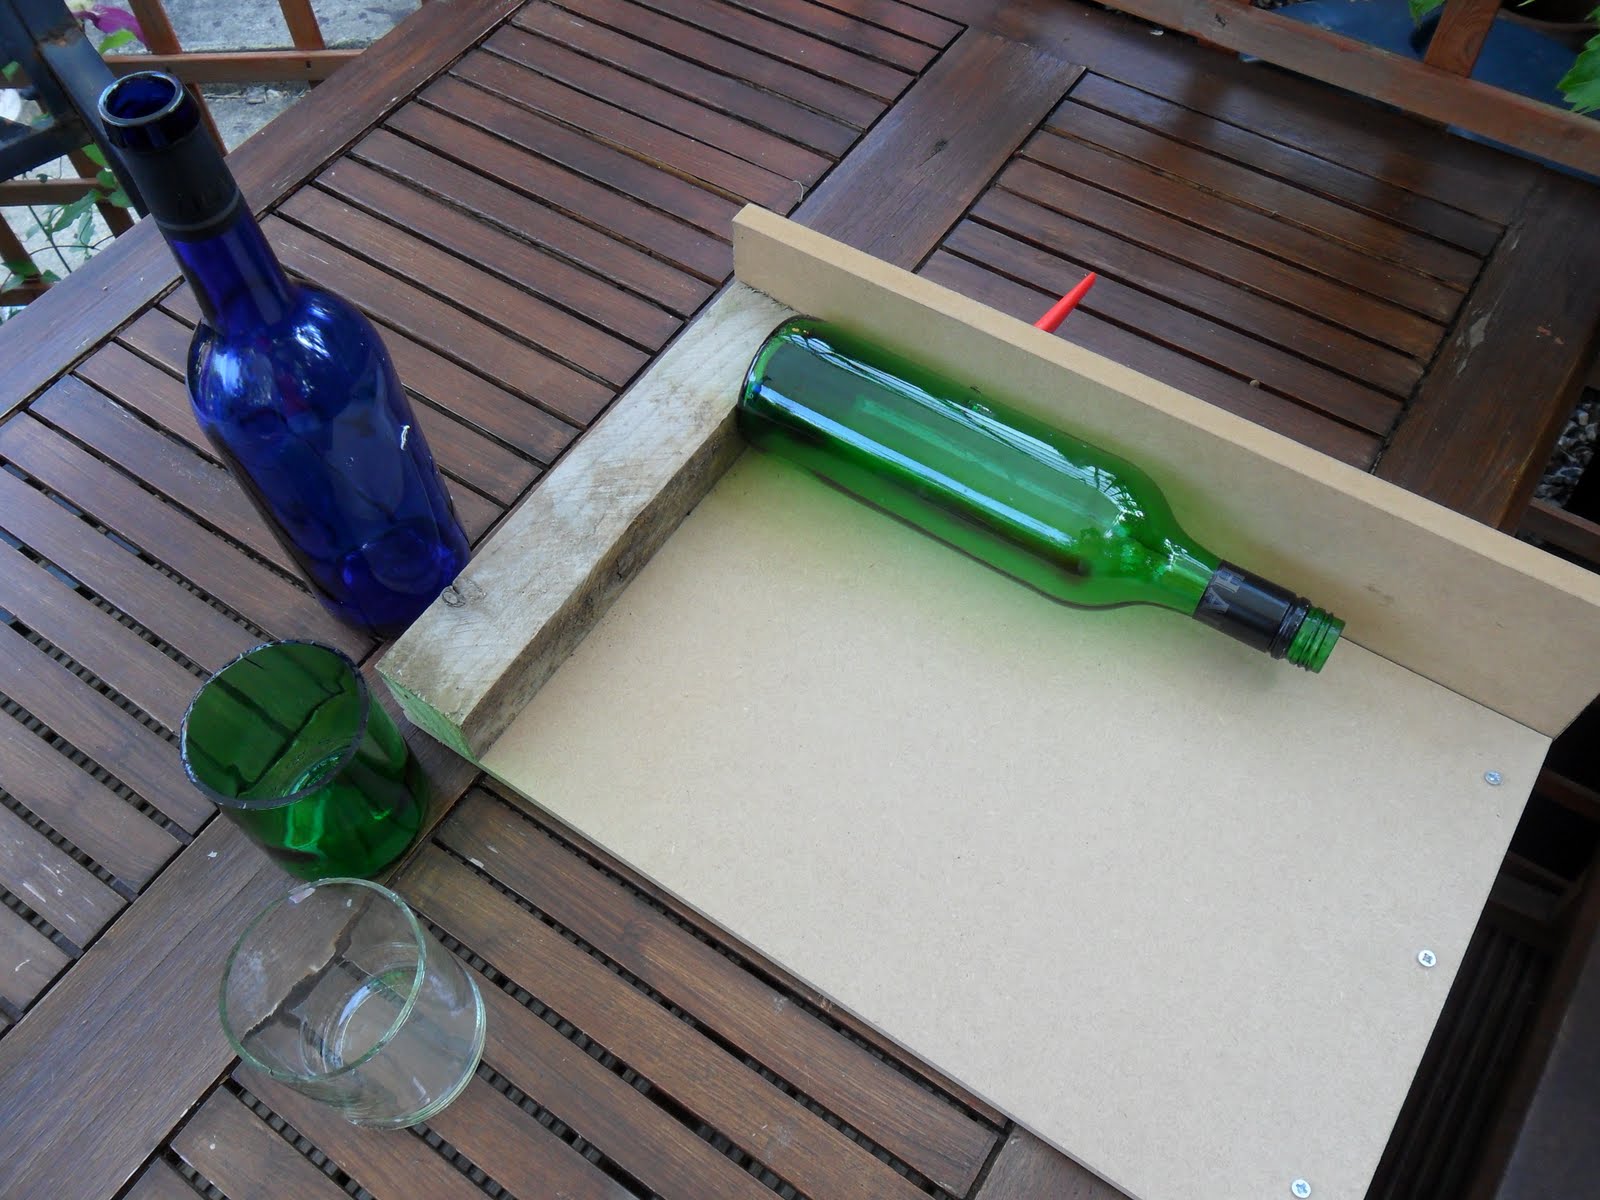 Busy Crafting: How to Make a Bottle Cutting Tool